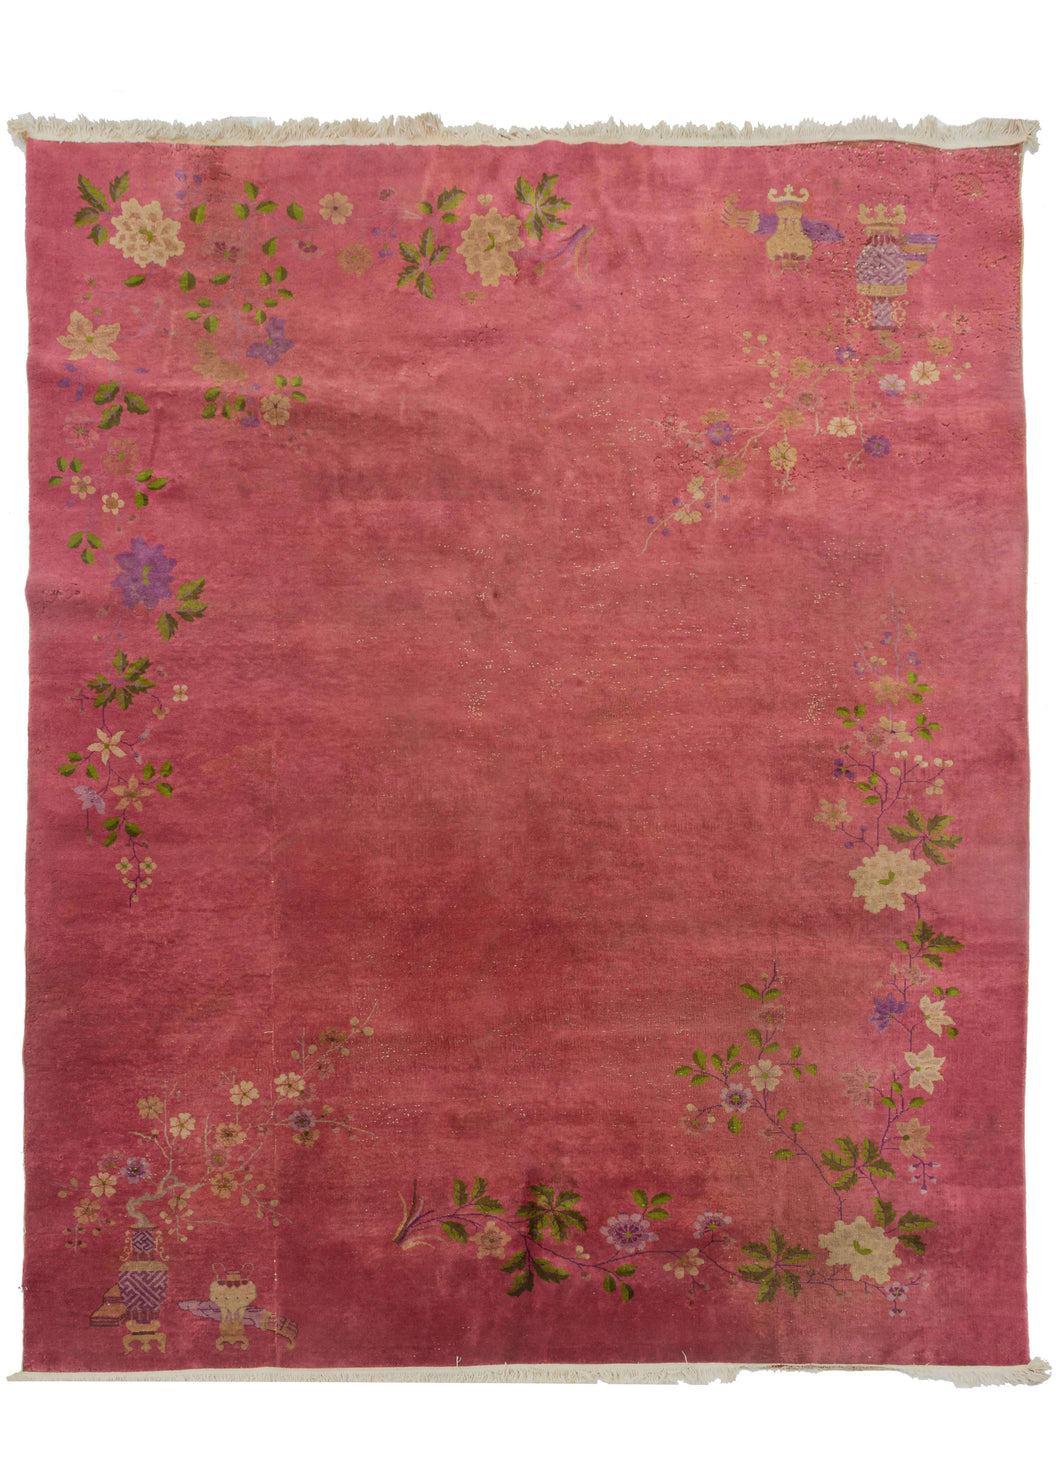 This Deco rug features a sparse and delicate floral design on an immense coral field. The design is open and borderless with a variety of flowers growing on vines as well as out of vases. The accenting palette is composed of greens, pinks, browns and golden yellows. 